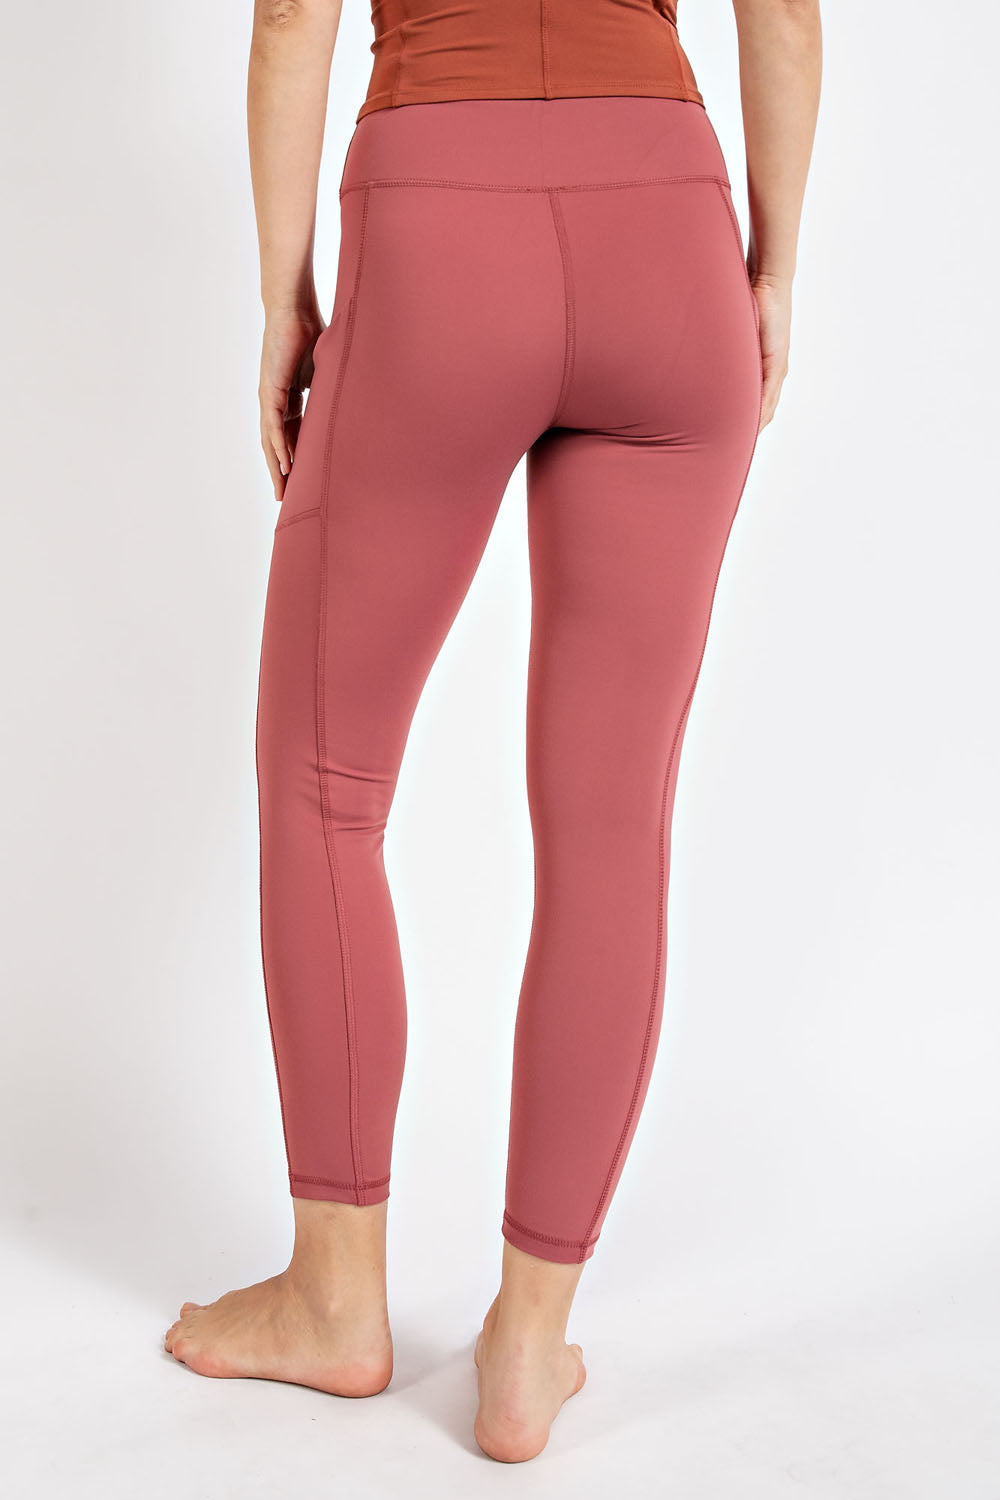 Clay - Butter Soft Leggings